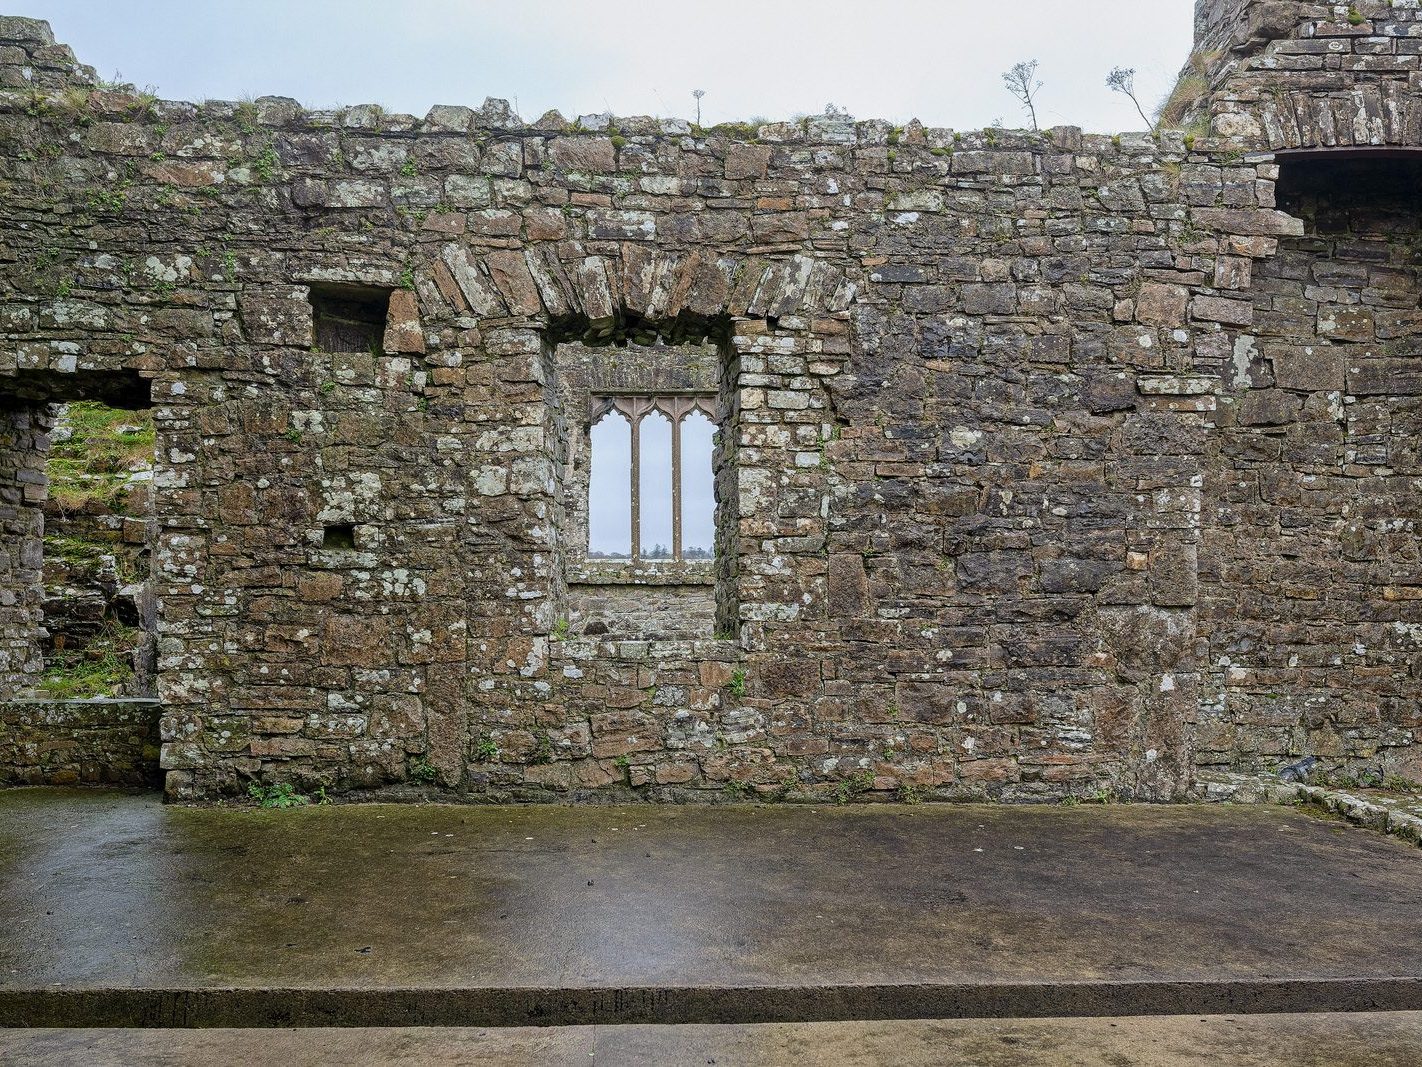 BECTIVE ABBEY WHICH I VISITED LAST CHRISTMAS [THERE WERE NO OTHER VISITORS AS IT WAS A VERY WET DAY]--225255-1